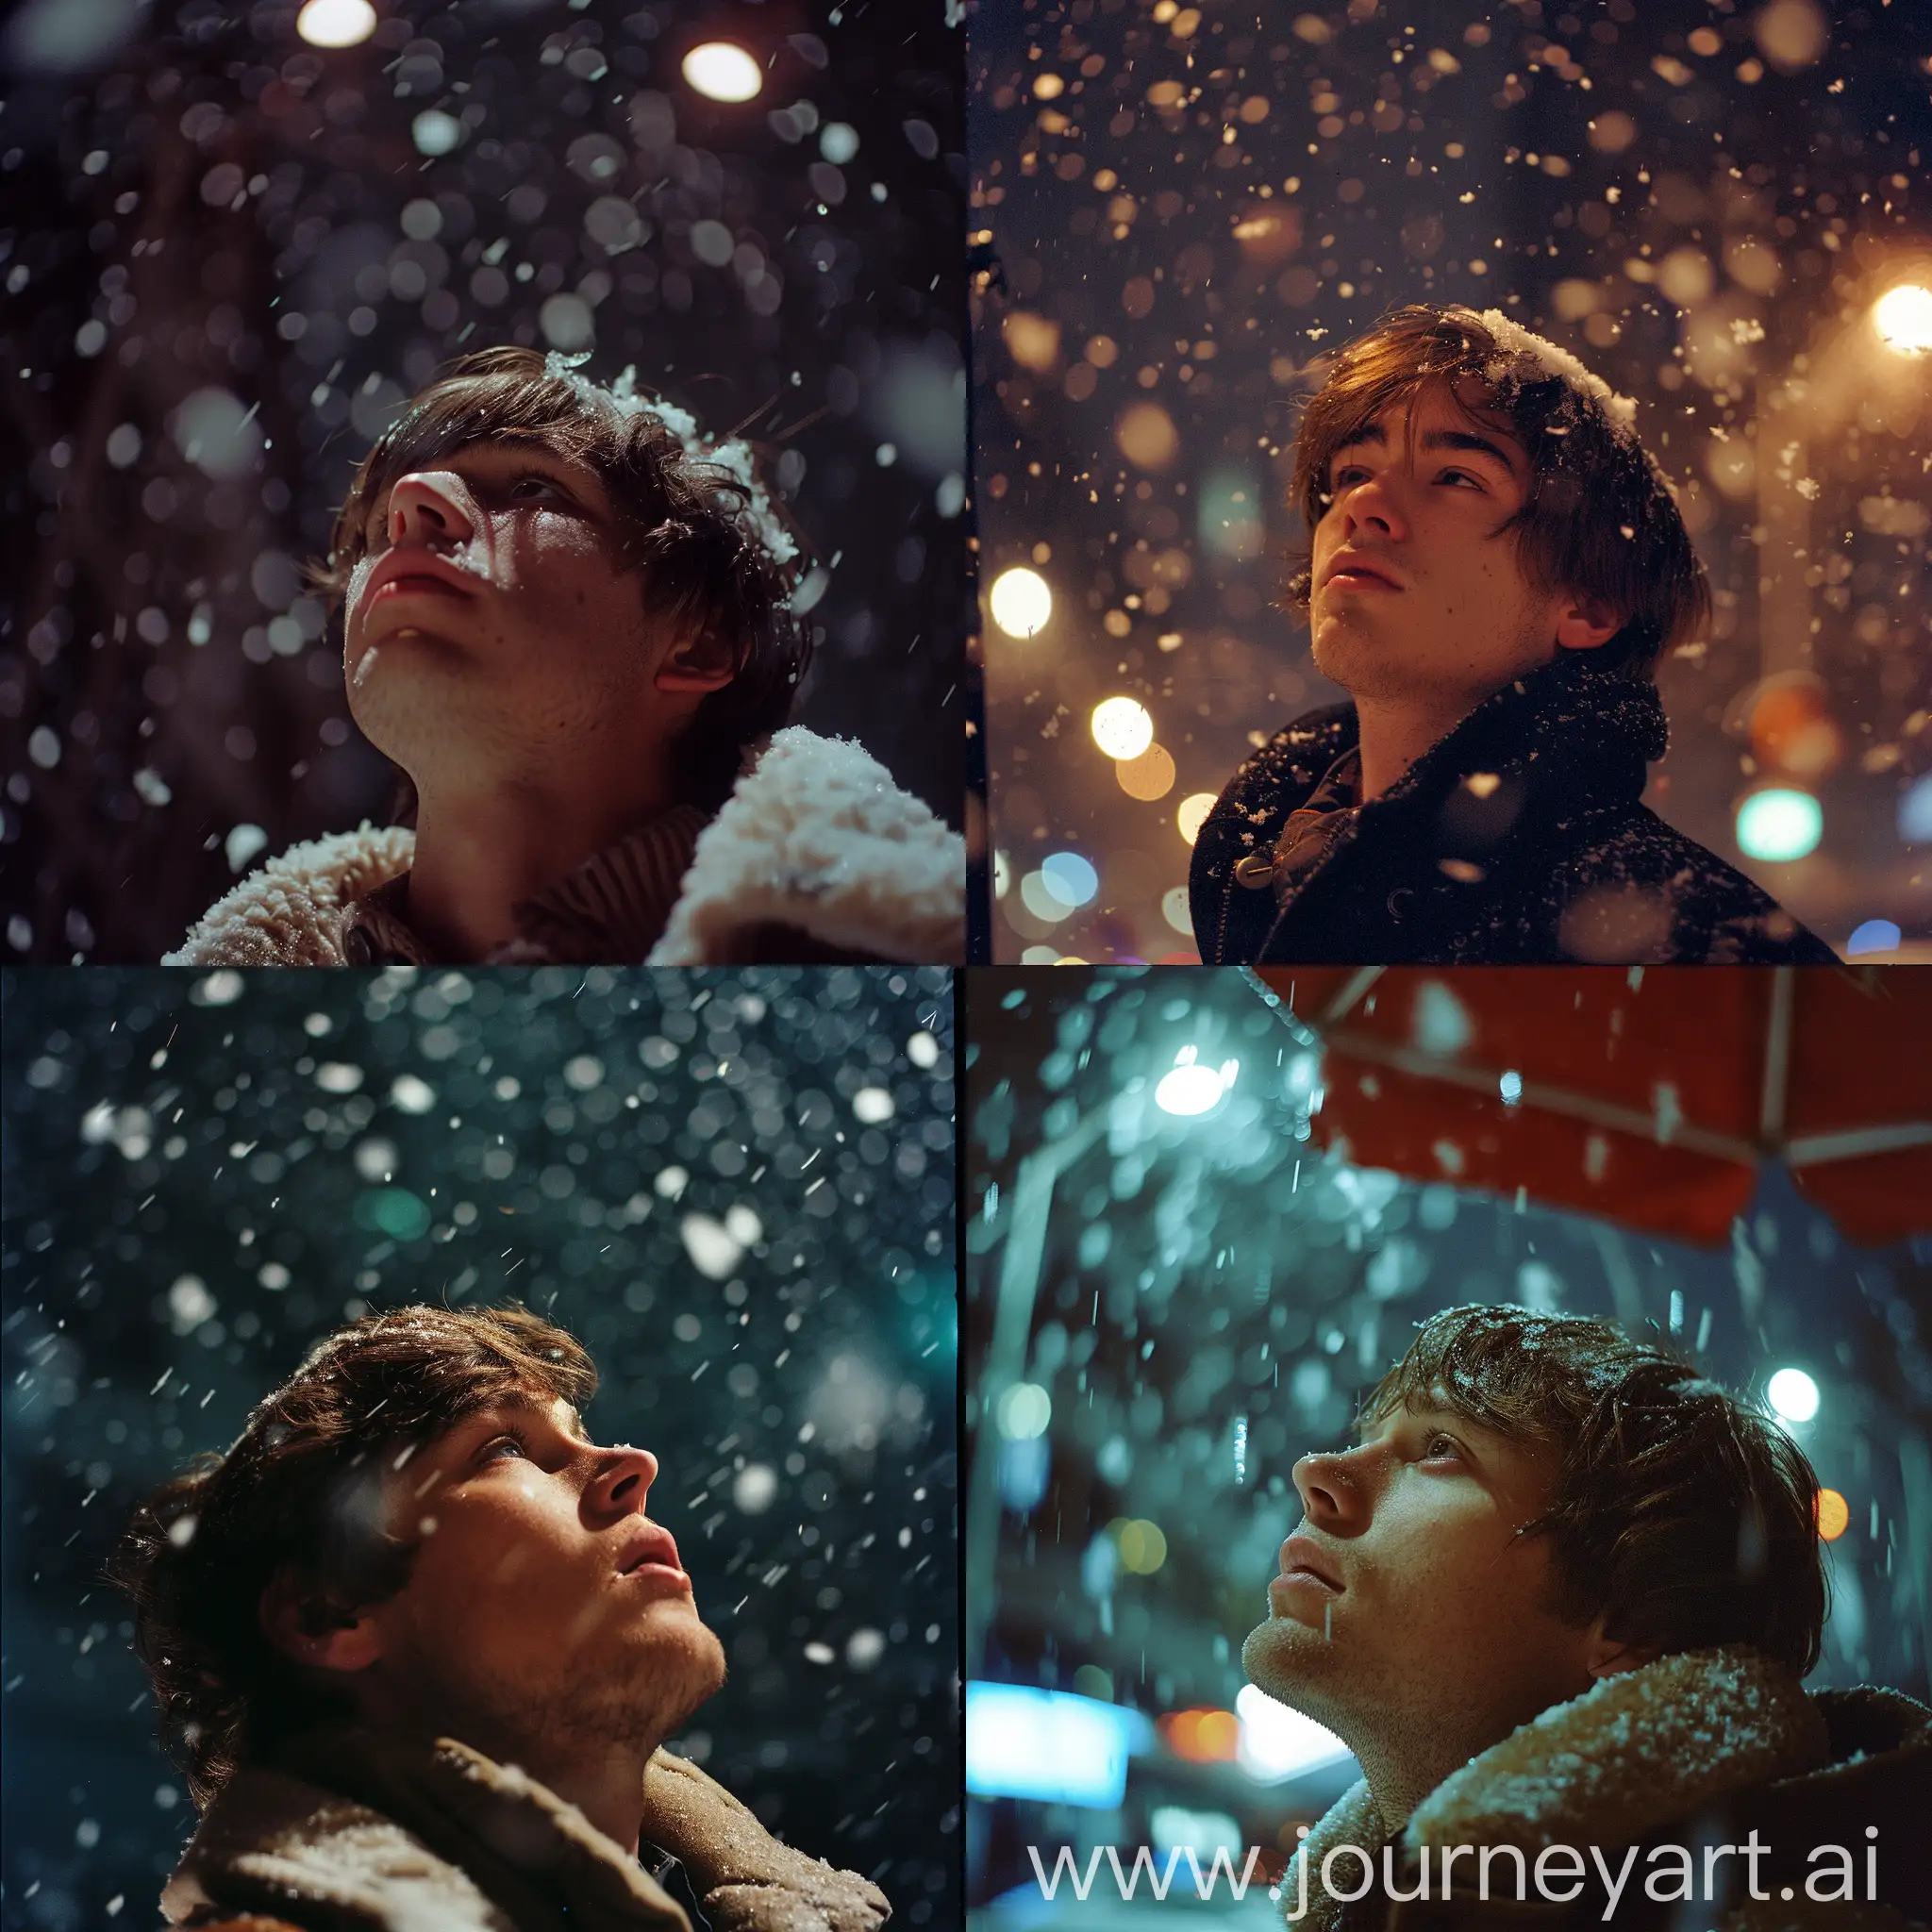 film photography style, a man with brown hair during a snowstorm at night, Low Angle, Medium Shot. cinematic, kodak kodachrome, cinestill 800D